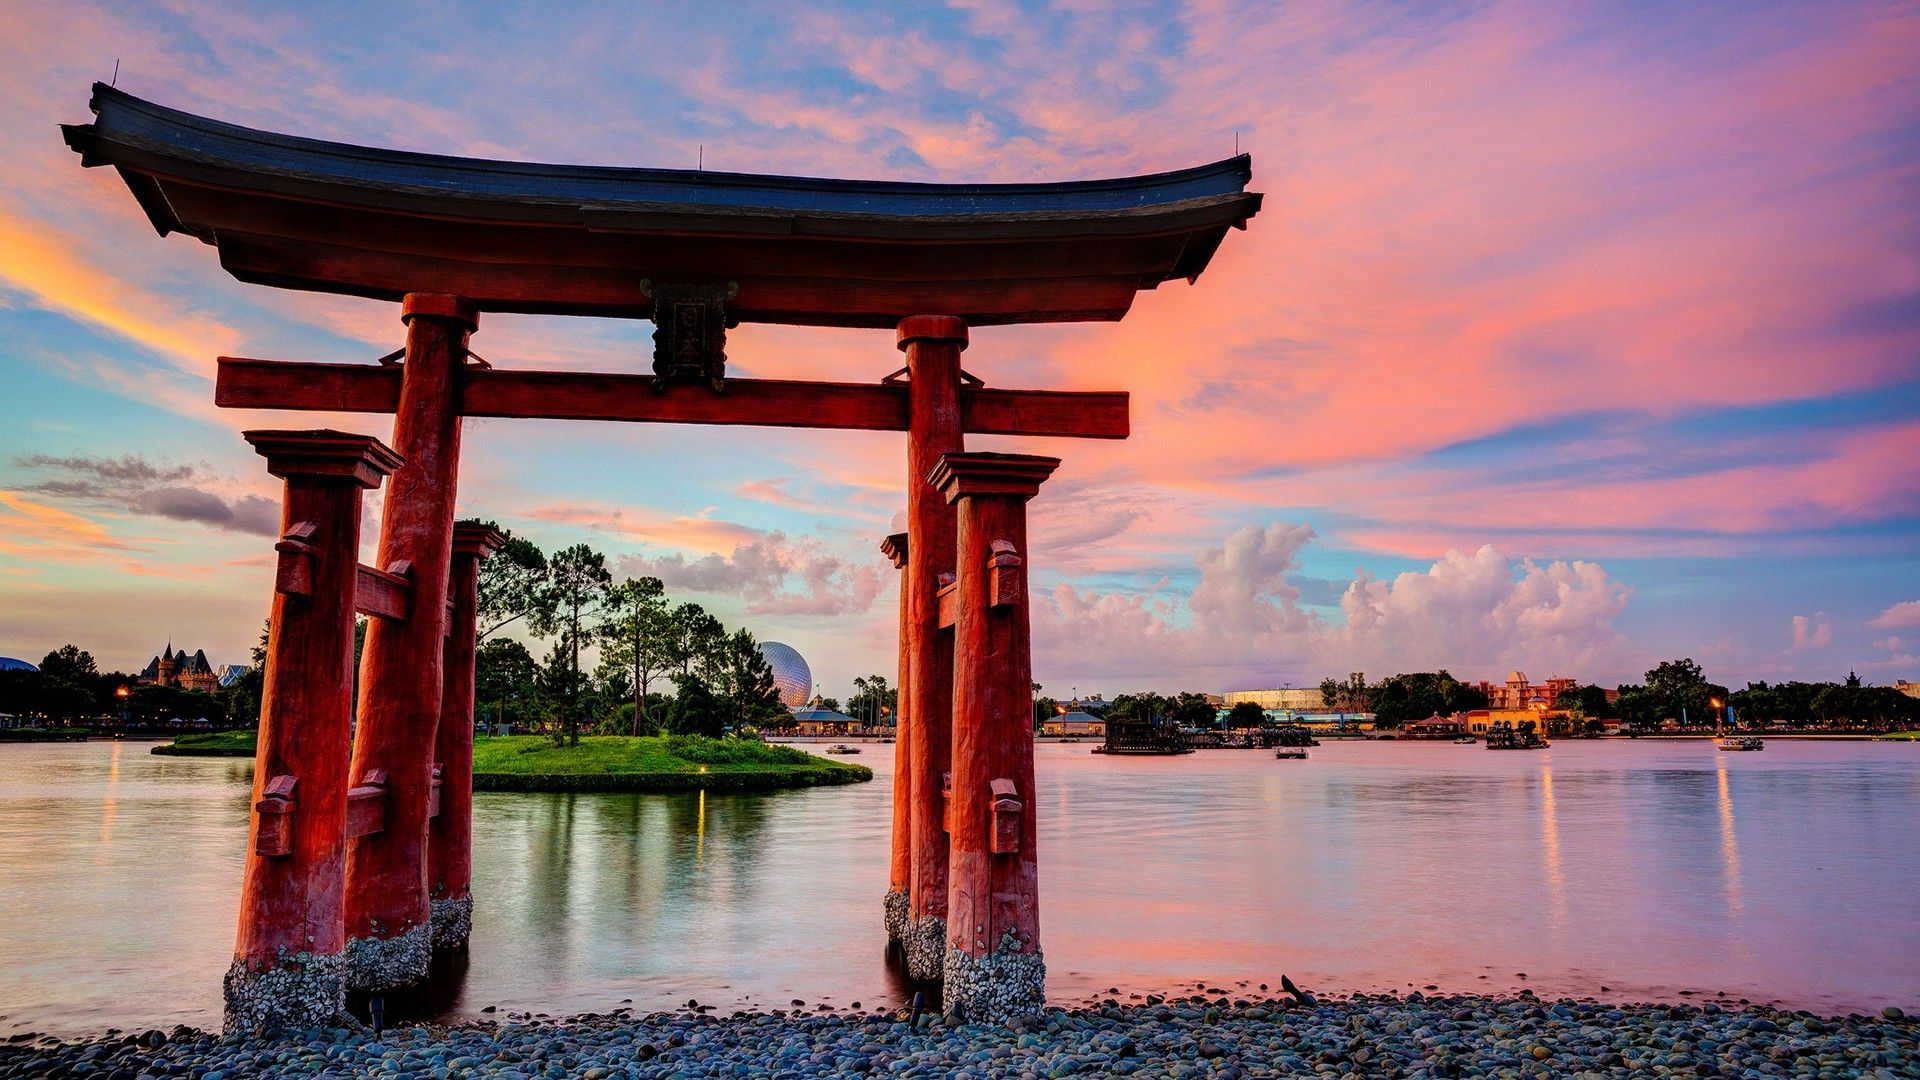 Torii Wallpaper. Torii Wallpaper, Torii Gate Wallpaper and Kyoto Torii HD Wallpaper